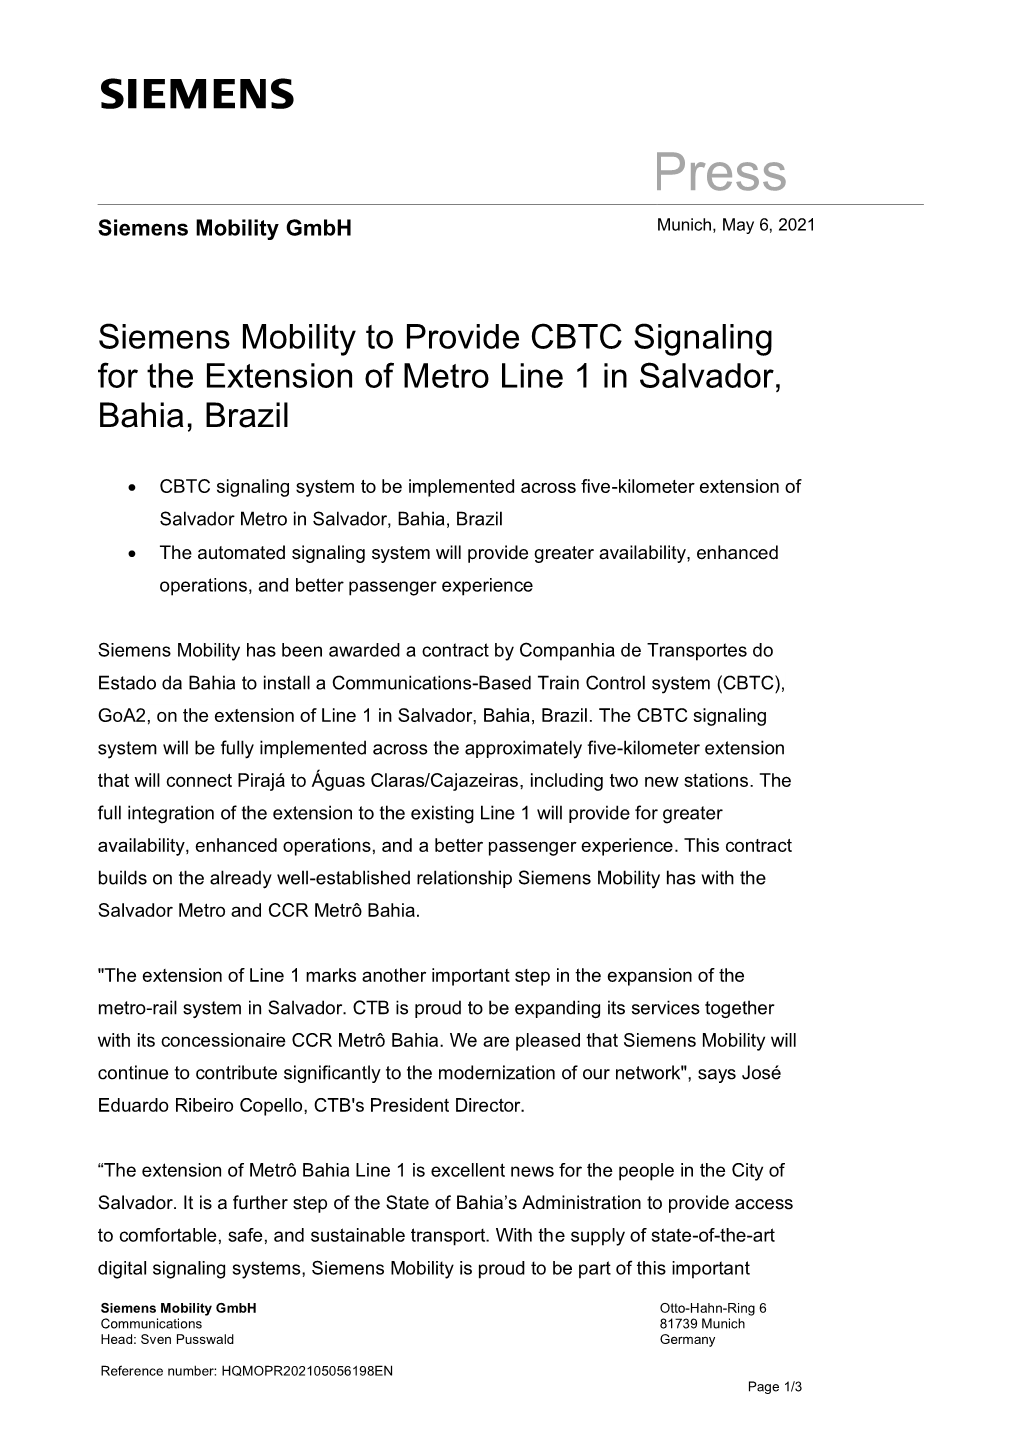 Siemens Mobility to Provide CBTC Signaling for the Extension of Metro Line 1 in Salvador, Bahia, Brazil